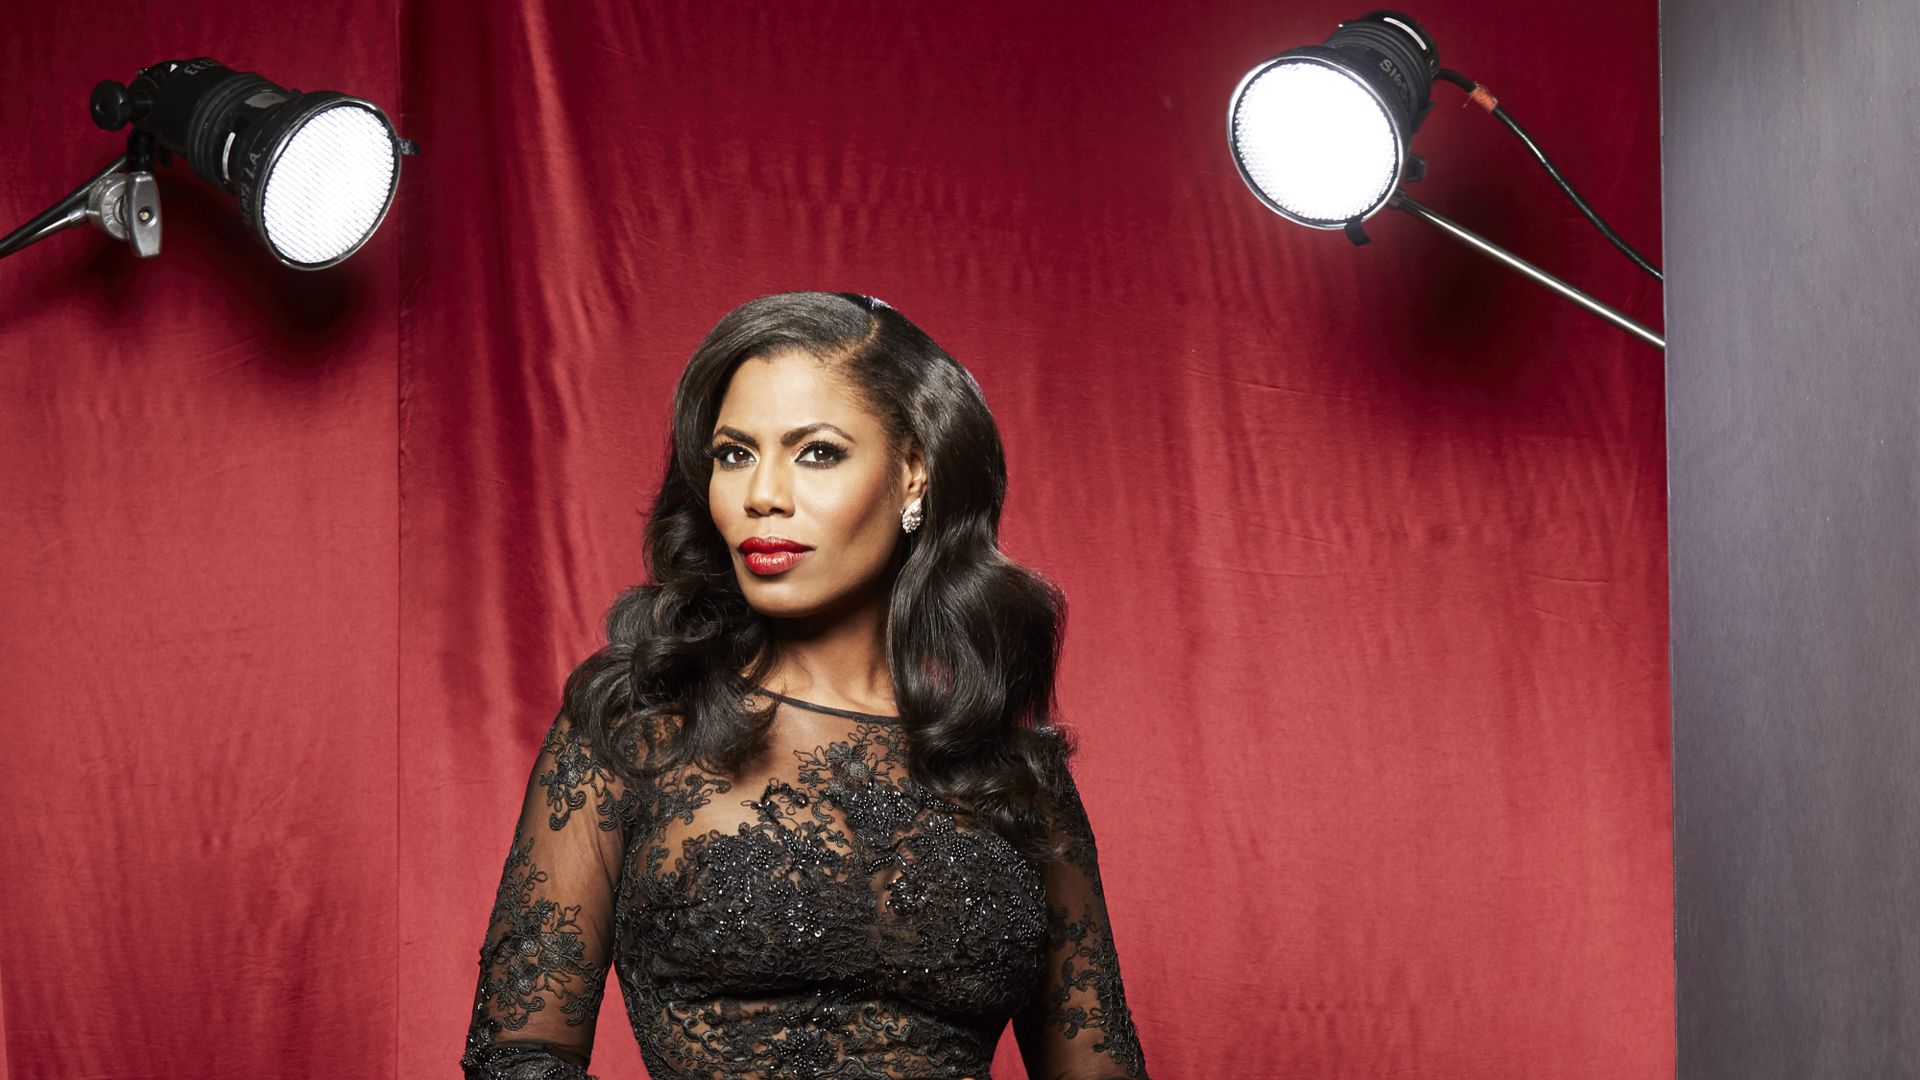 Omarosa standing in front of a red curtain with spotlights on either side, wearing a sexy black dress